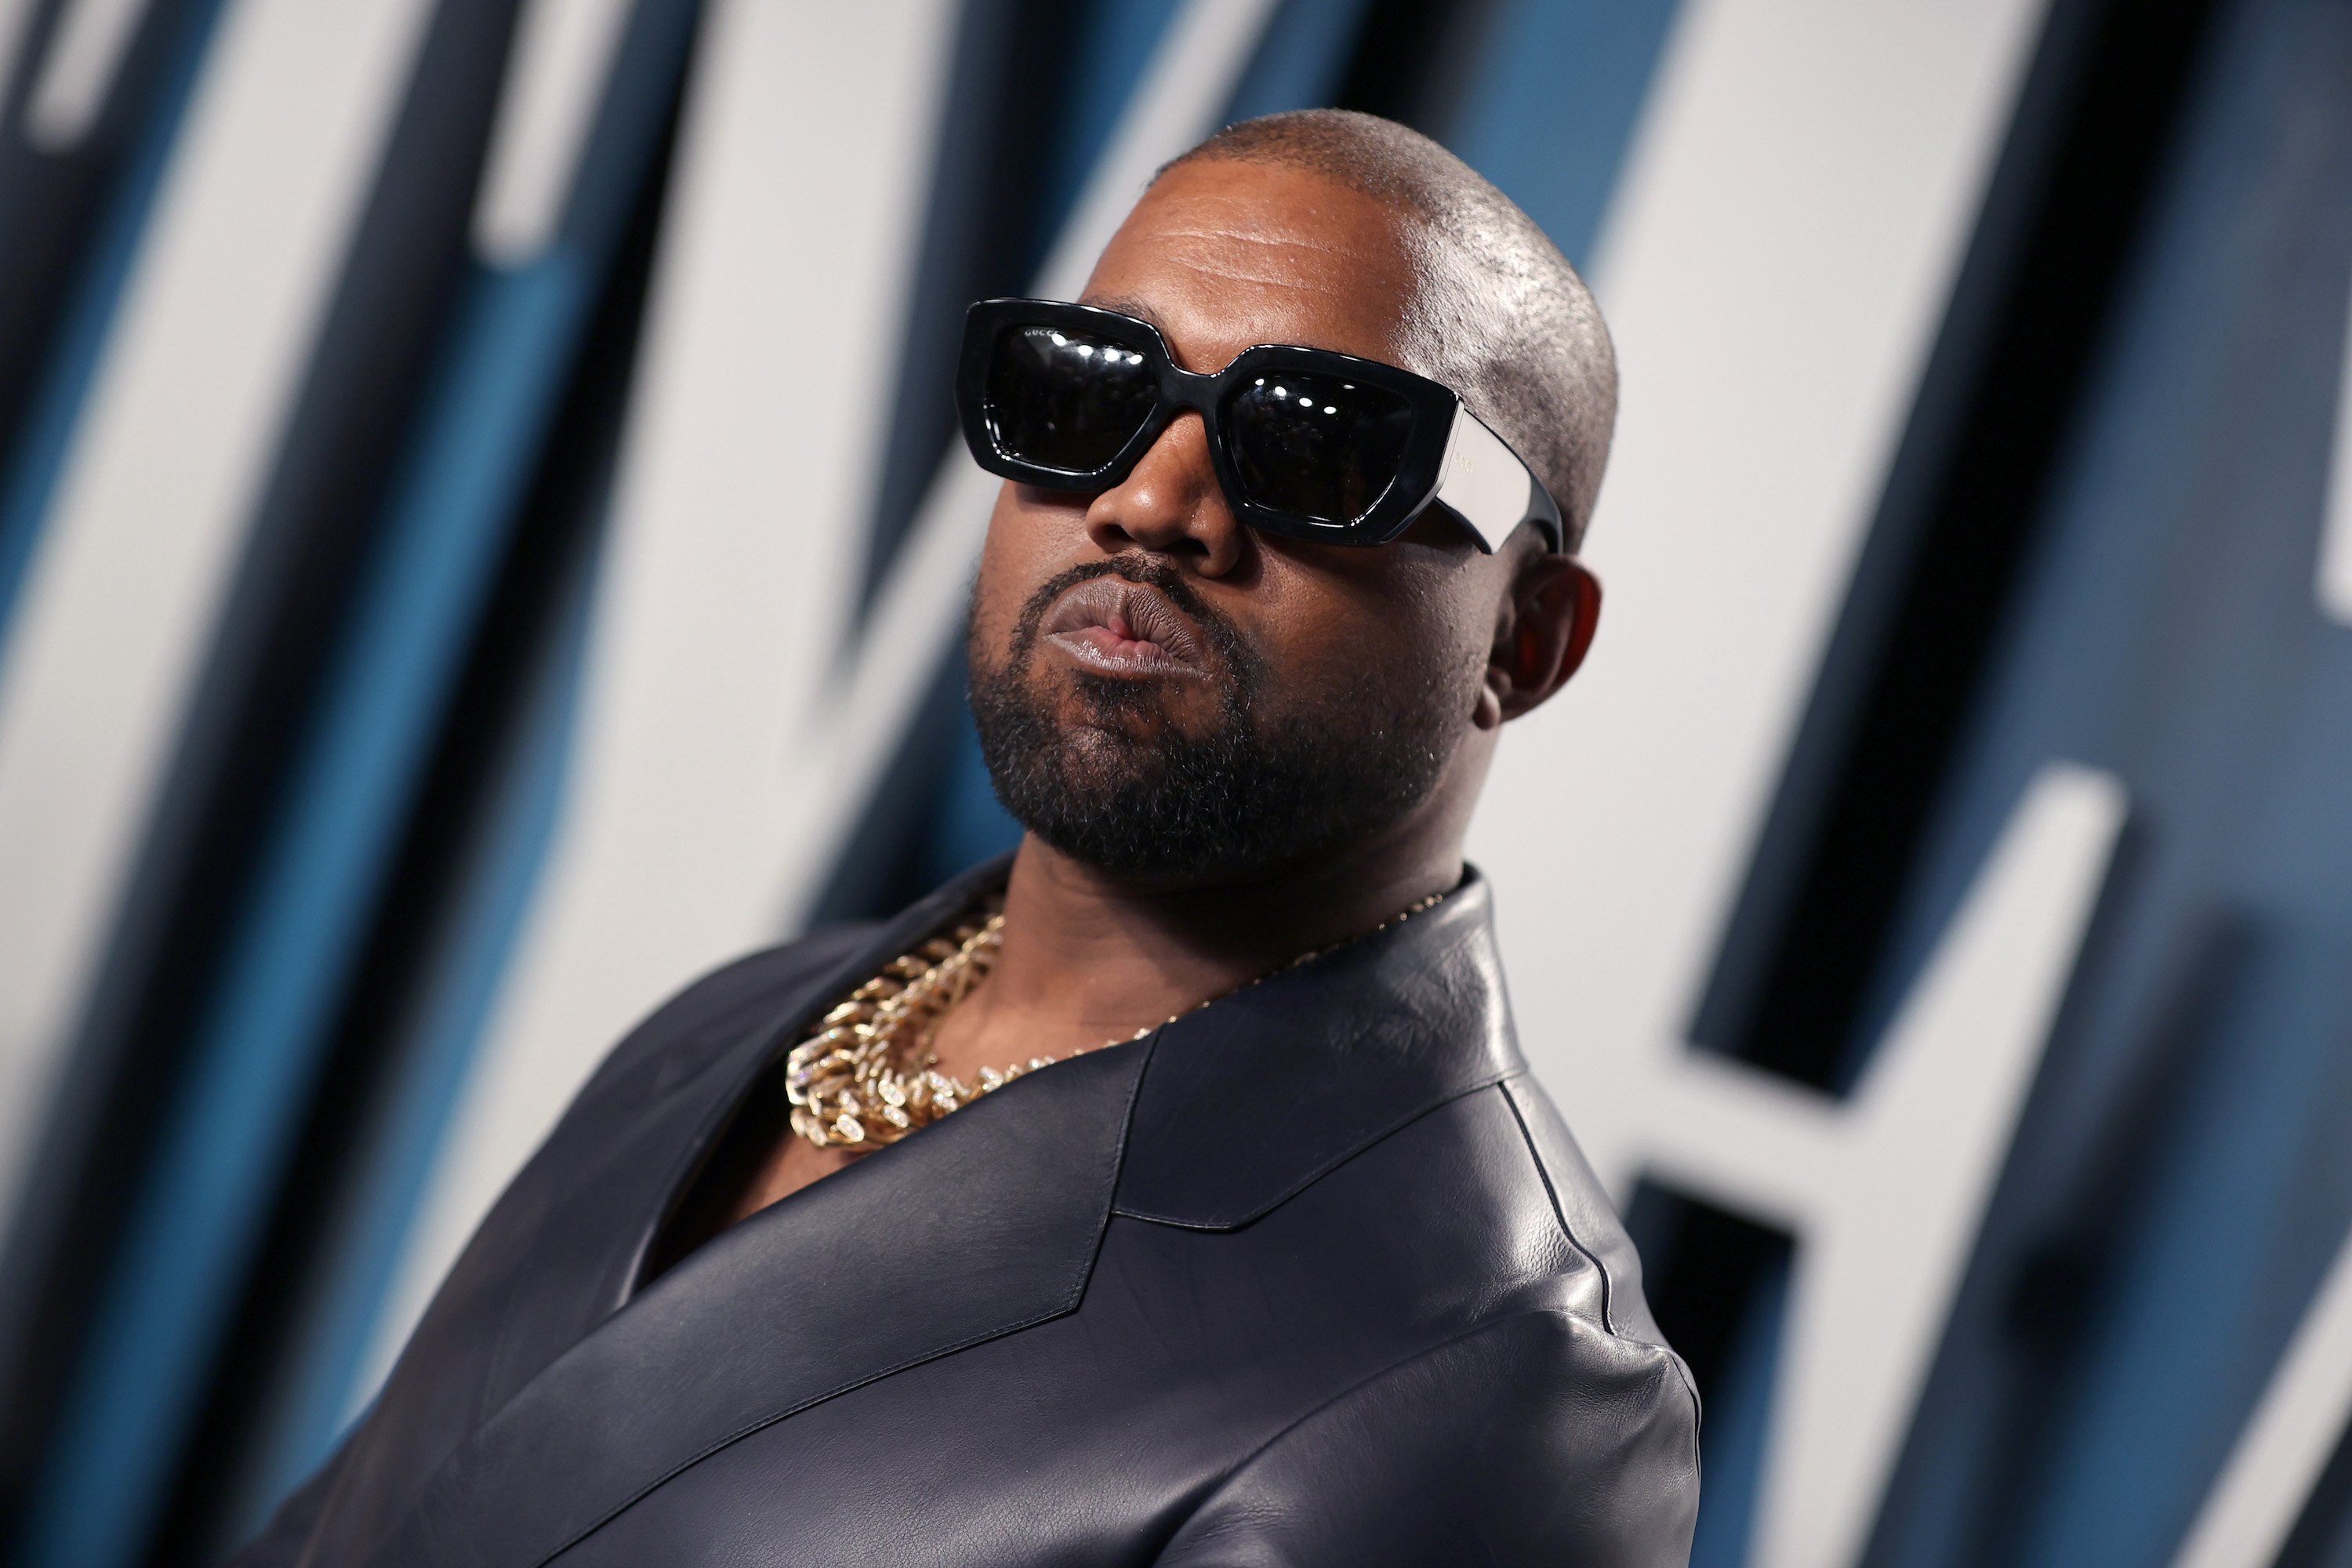 Kanye West, who was called out by longtime collaborator Mike Dean, wearing sunglasses and a black leather jacket